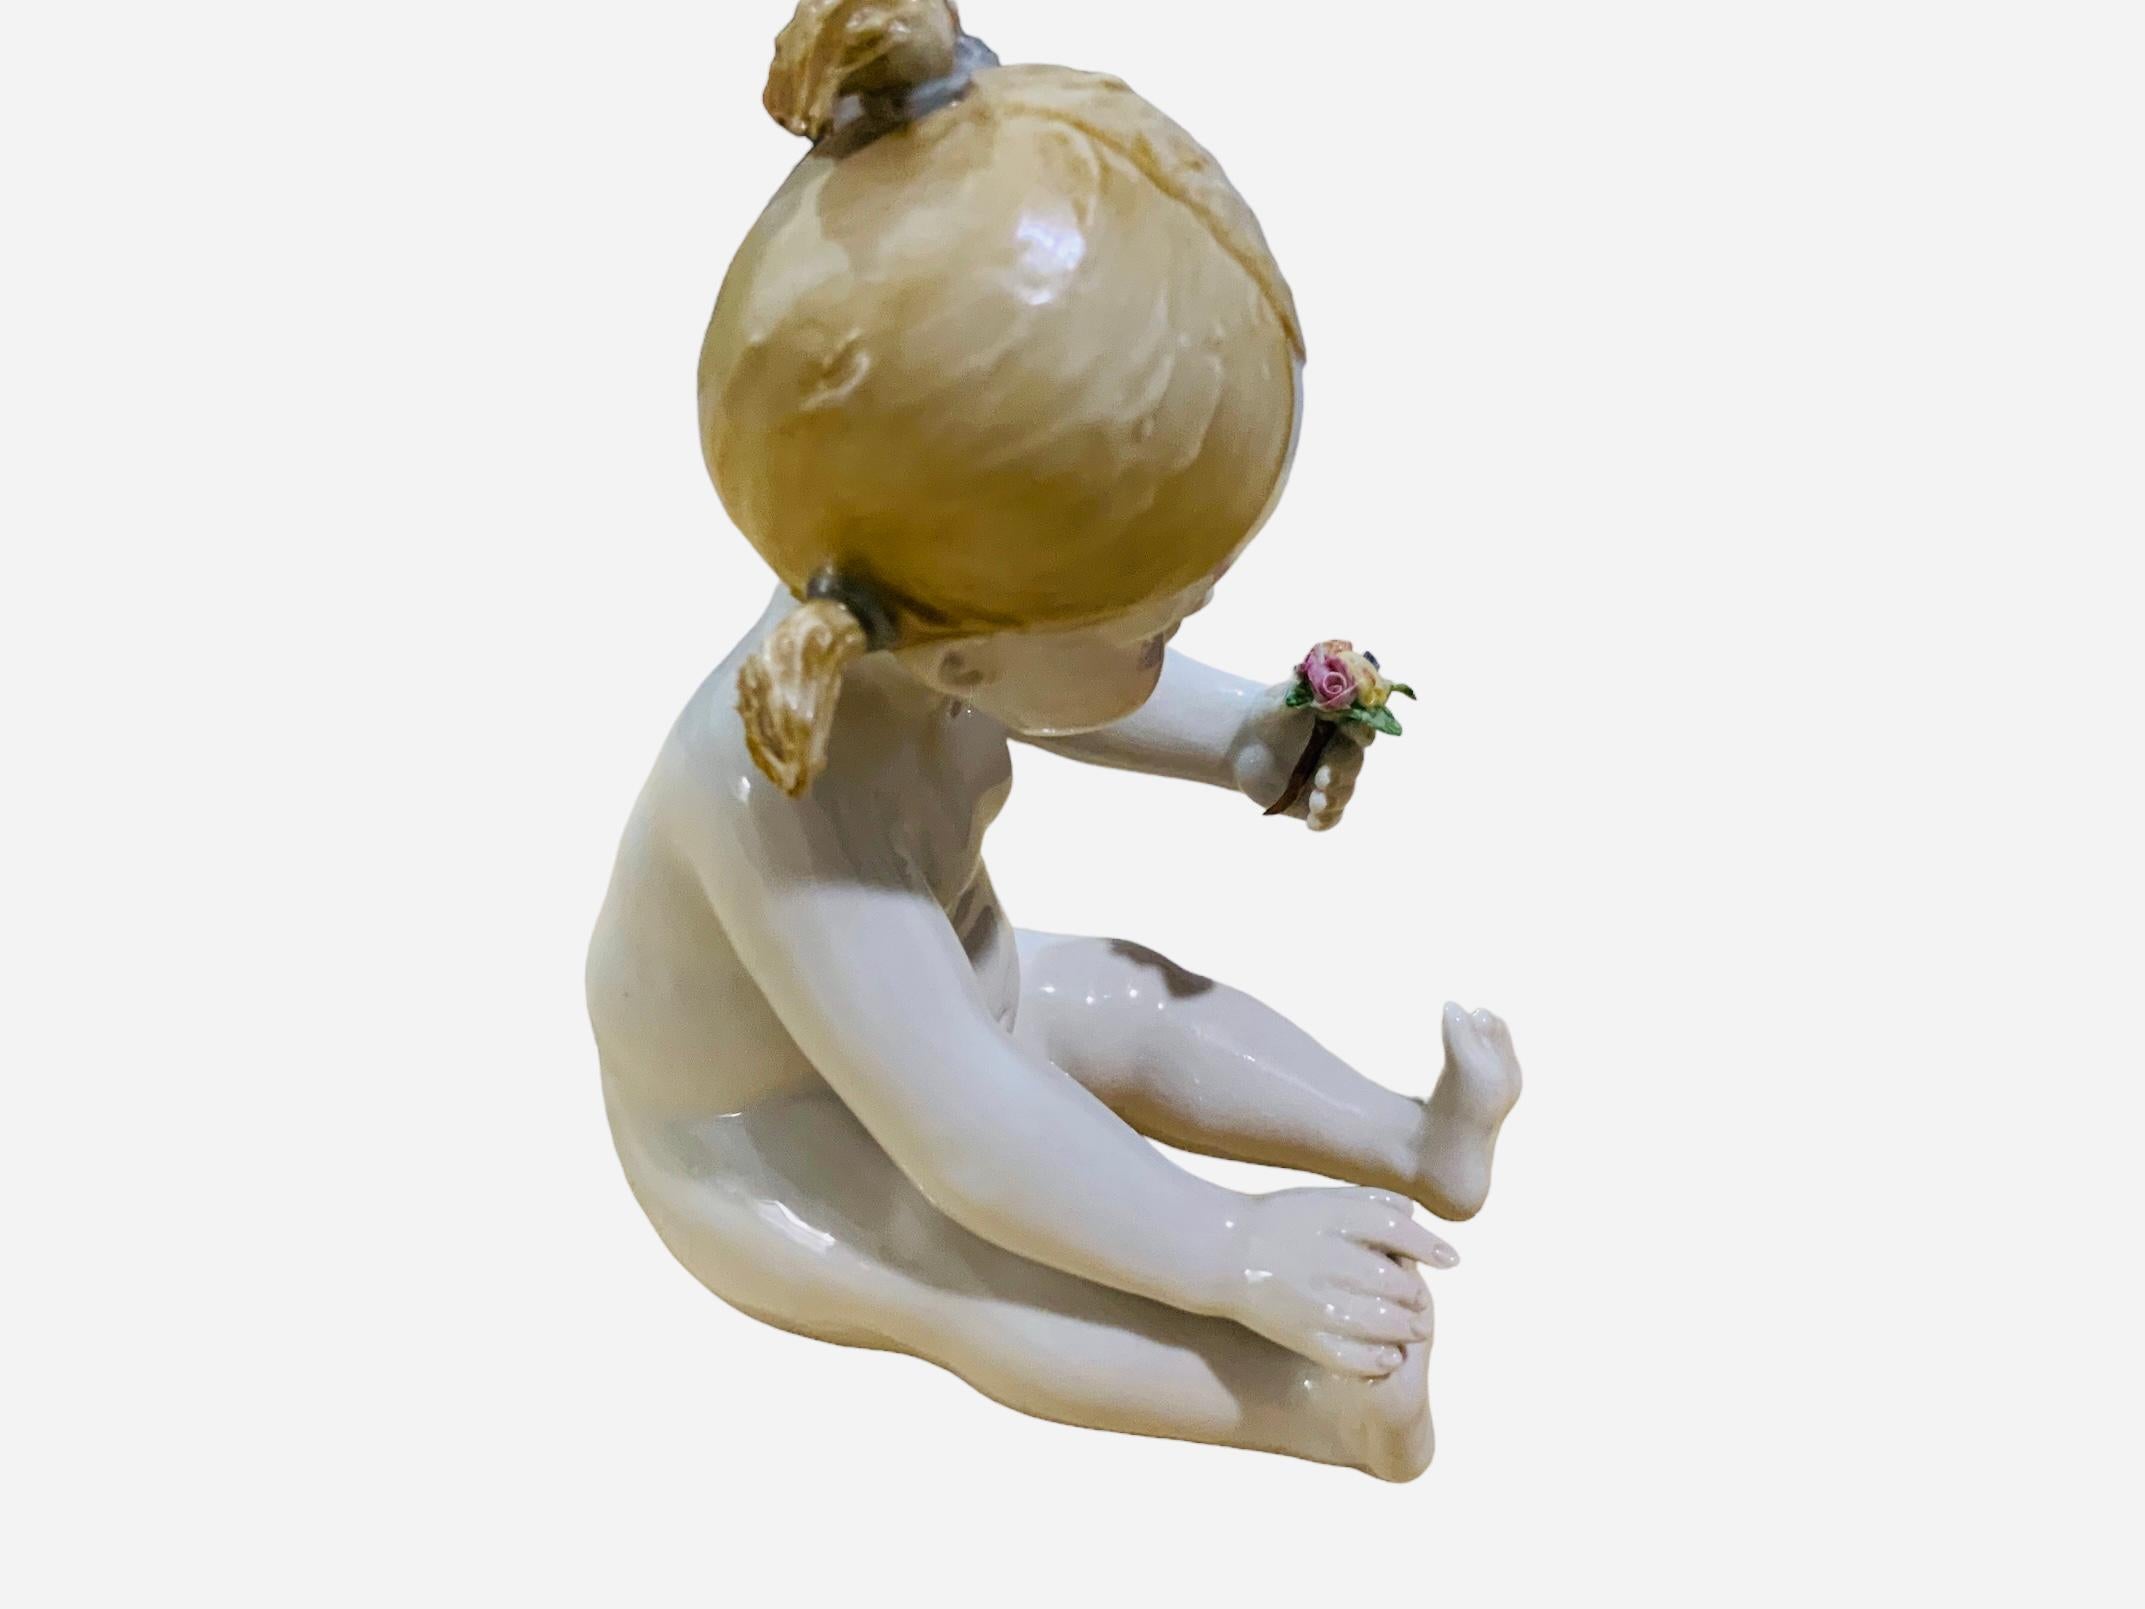 This is an Italian Capodimonte Porcelain Baby Girl Piano Figurine. It depicts a nude baby girl with large blue eyes and blonde hair arranged with ponytails sitting down admiring a bouquet of flowers that she is holding with one of her hands. Below